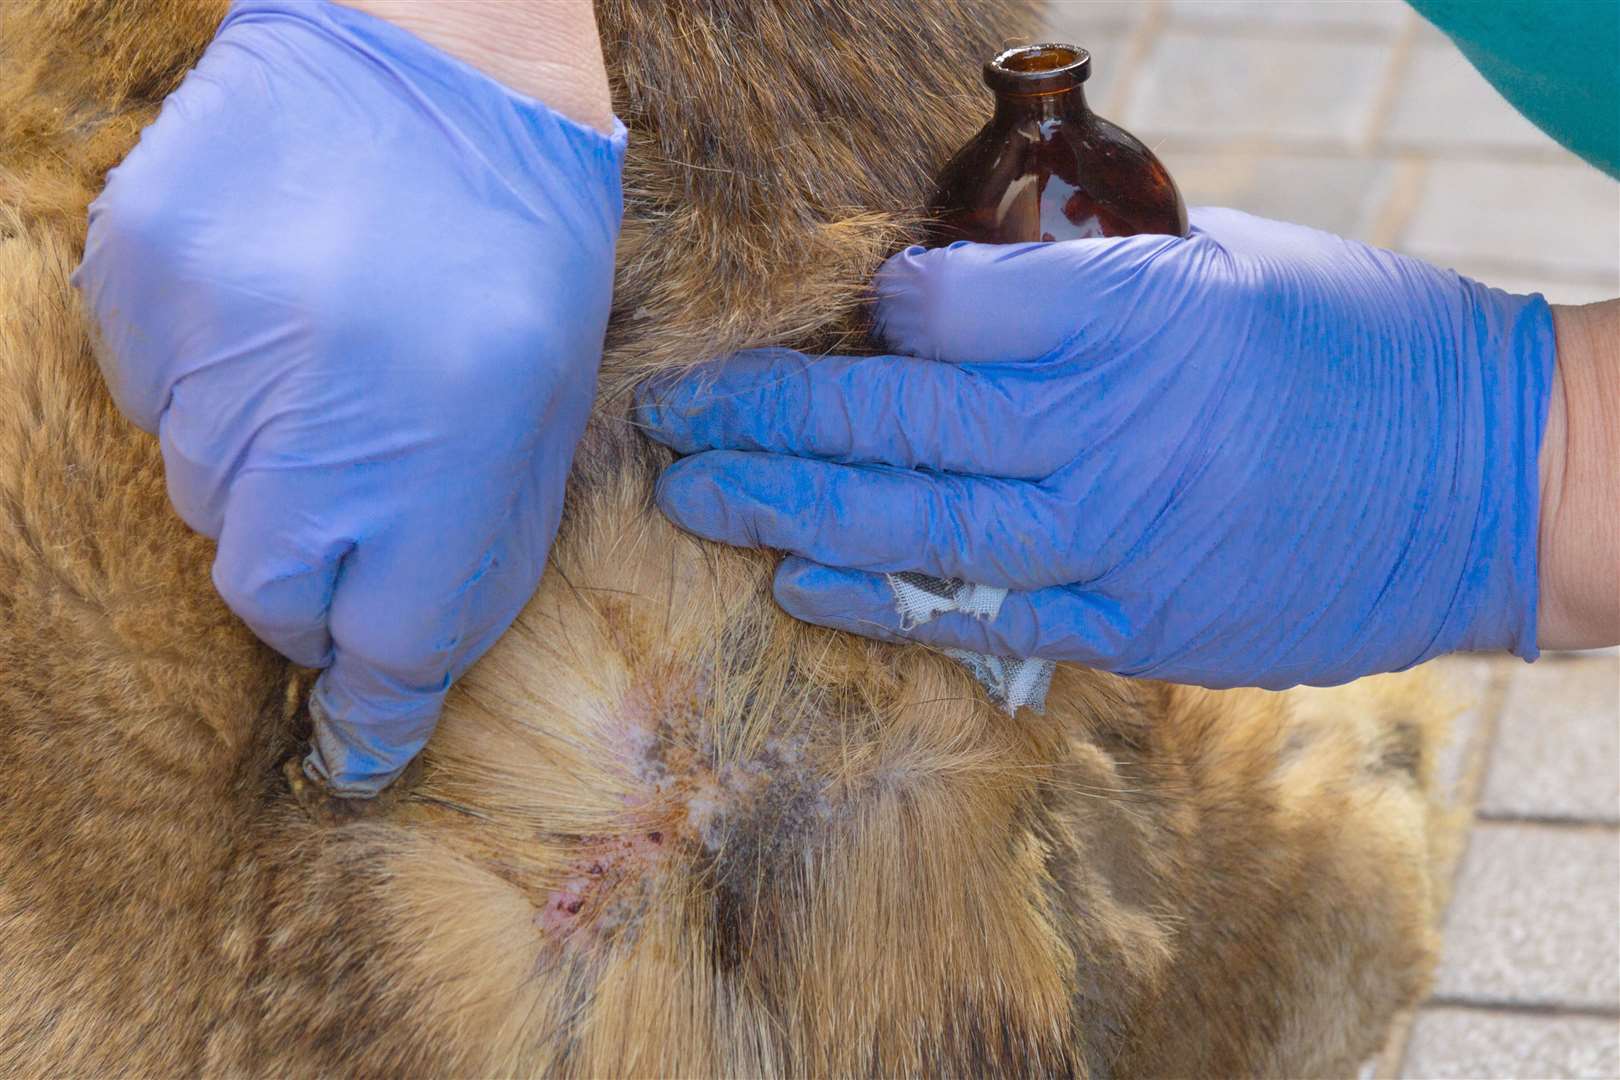 A dog getting treatment for their skin condition. Photo: istock/Natalya Stepina